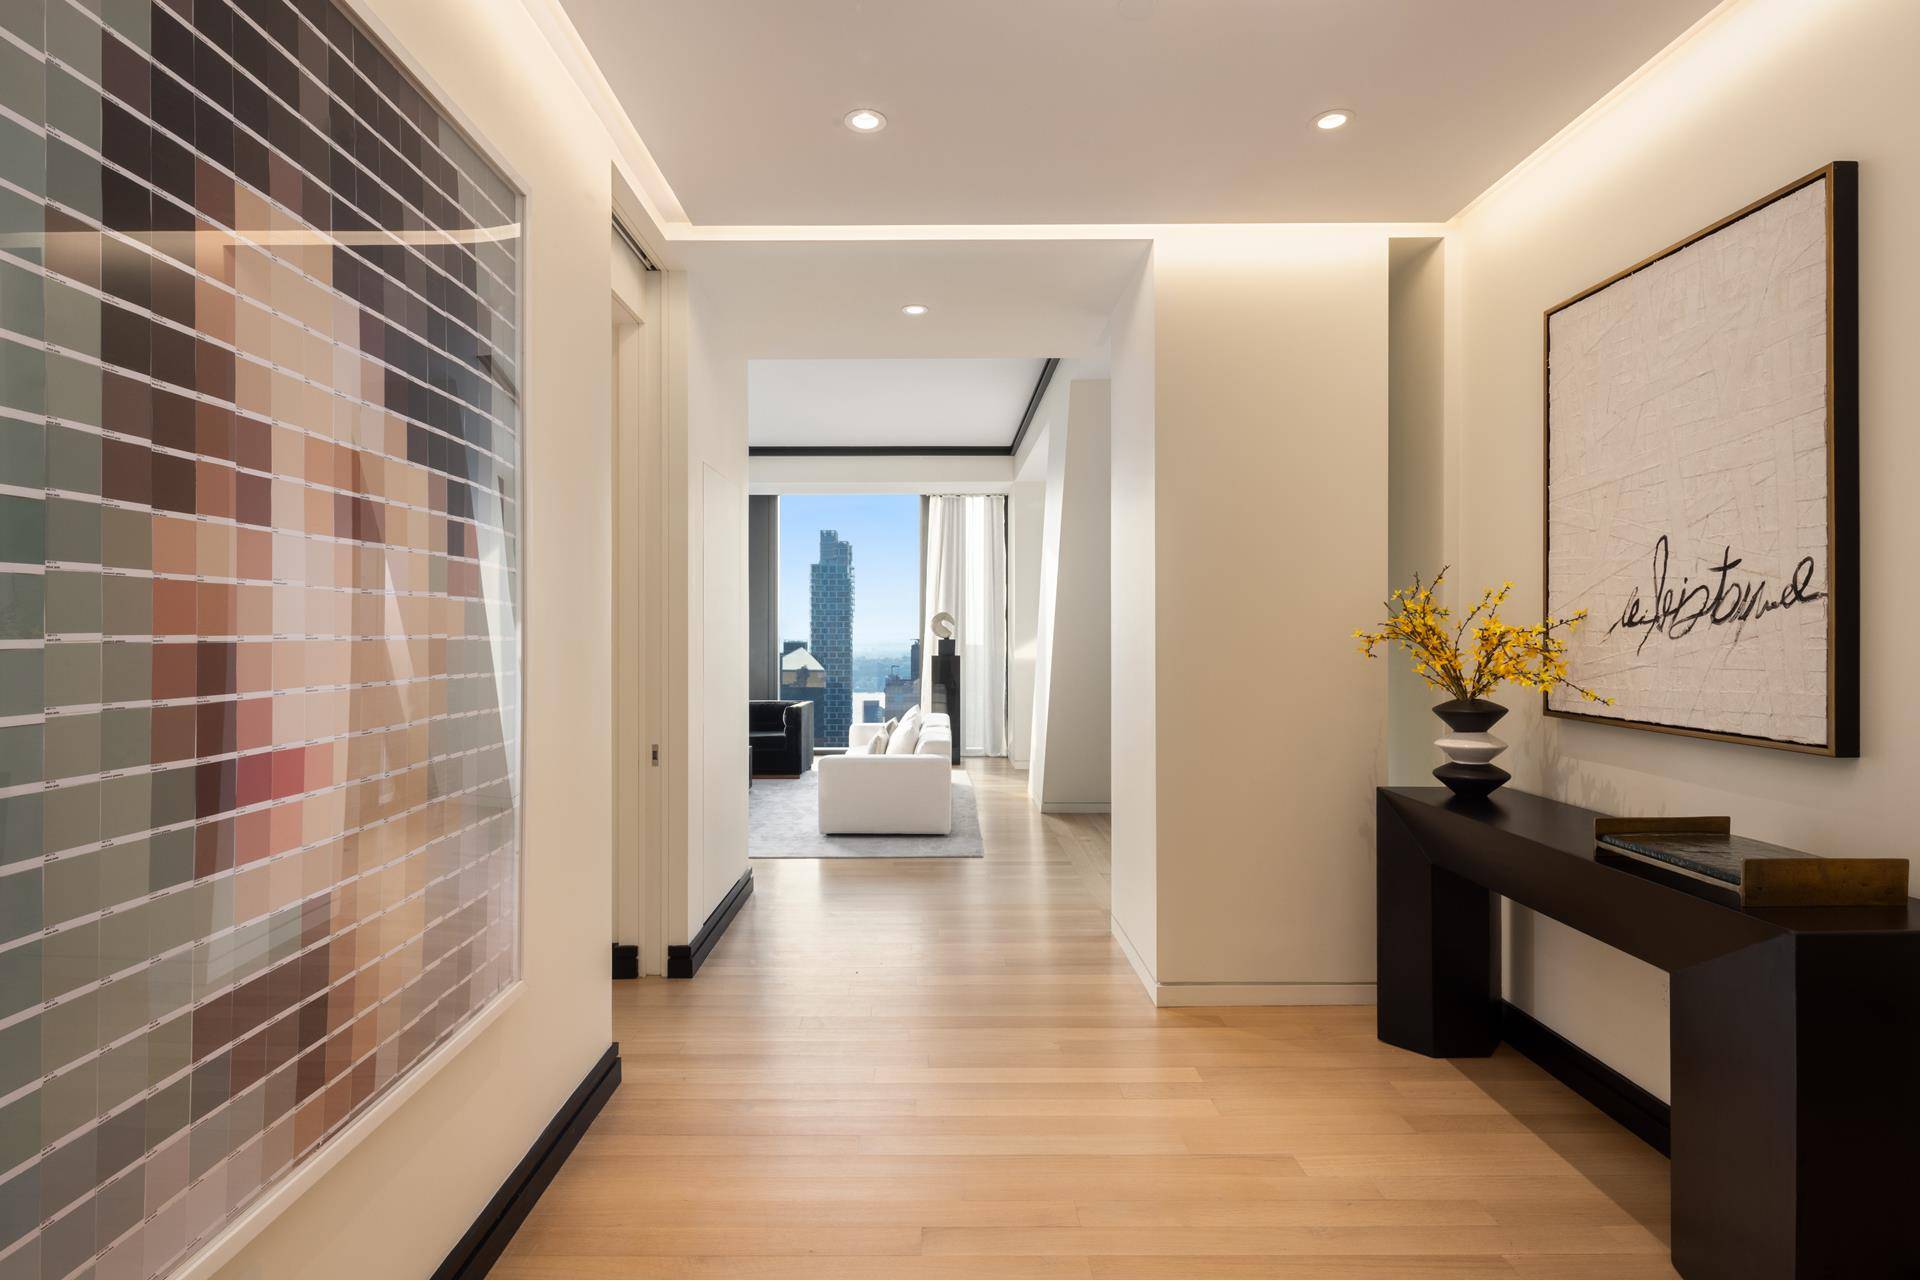 Combining superb sophistication and craftsmanship with the intimate feeling of home, Residence 60B at 53 West 53 comprises 3, 132 square feet, offering three bedrooms, three and a half bathrooms, ...